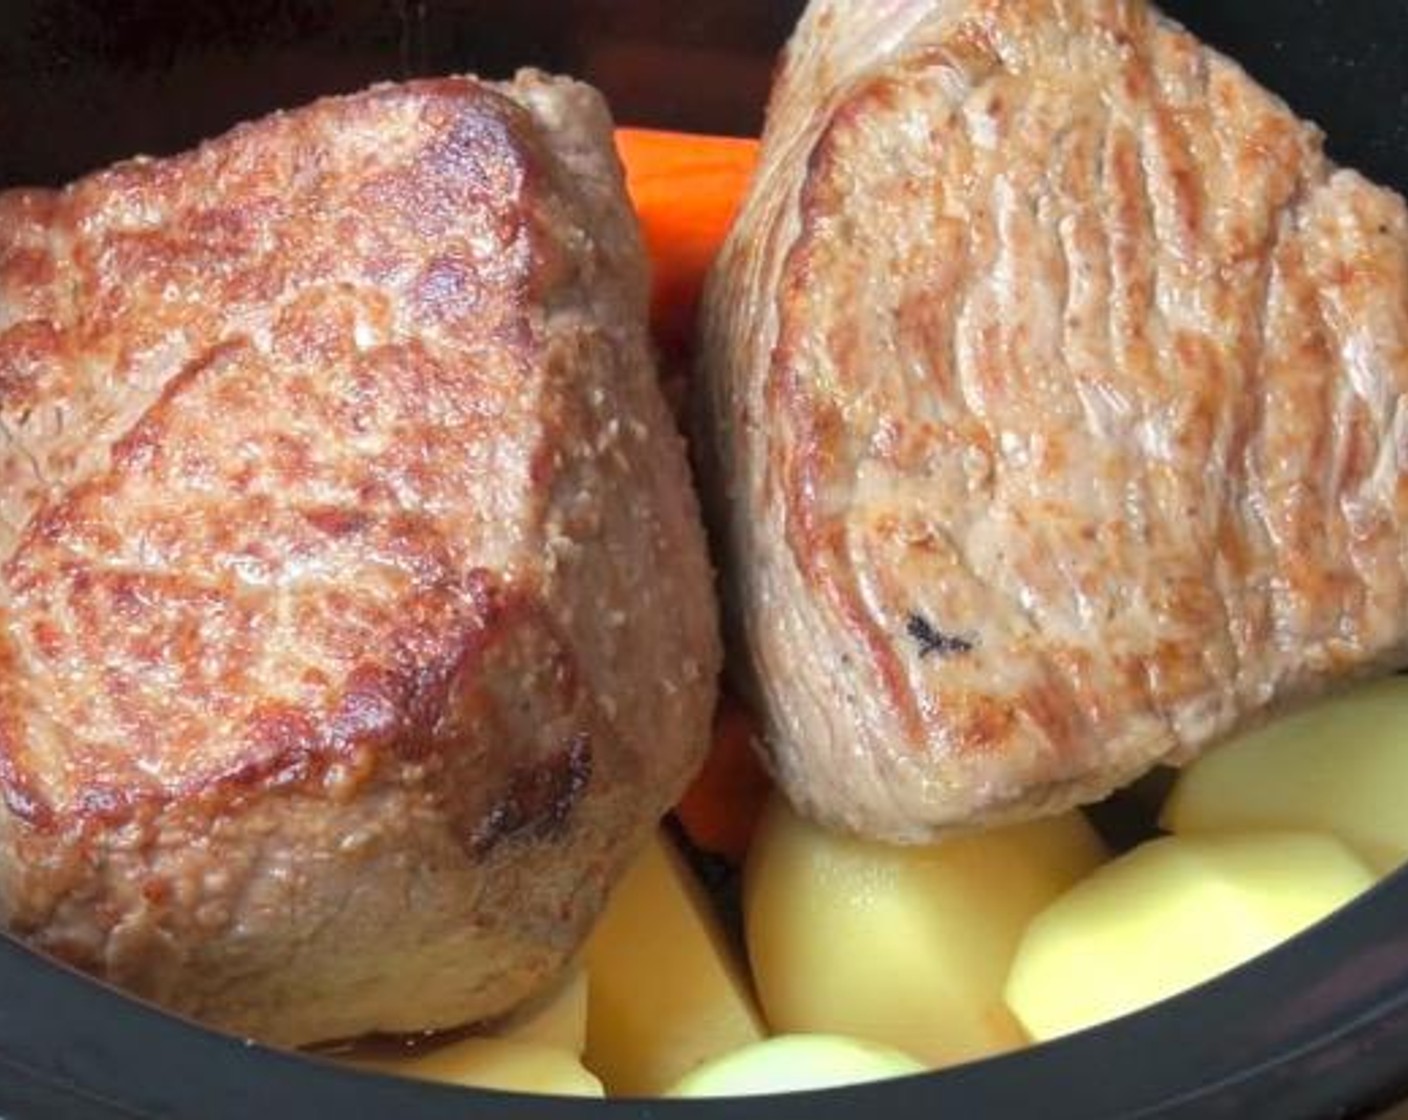 step 3 In a lightly greased slow cooker, add Potatoes (5), Carrots (5) and Yellow Onion (1). Mix together, then place the beef roast on top. Pour Beef Stock (1 1/2 cups) over top. Cover and cook on low for 9 hours.